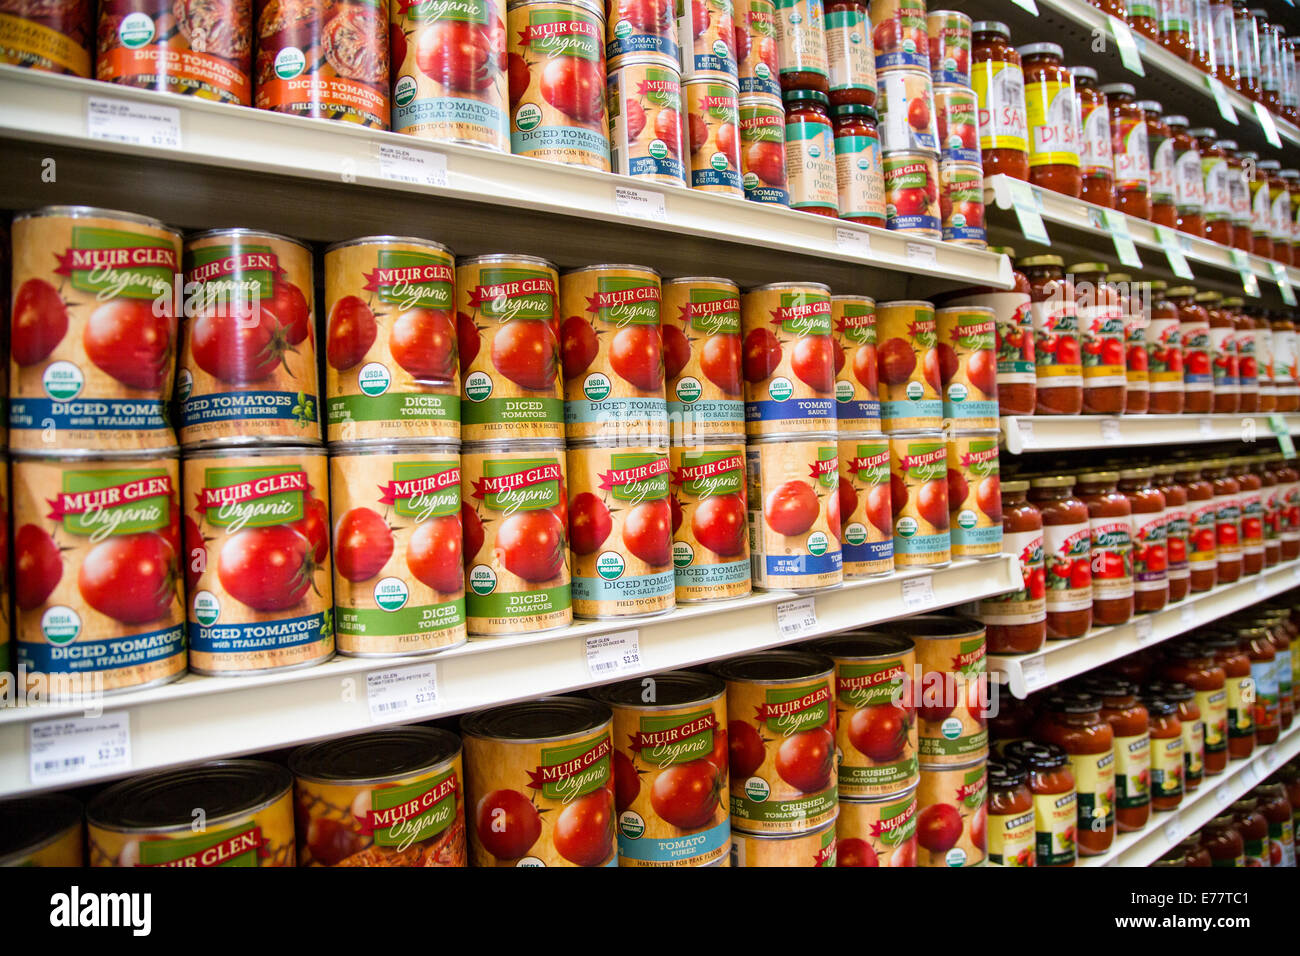 A natural foods grocery store aisle with shelves of Muir Glen Organic canned tomato products. Stock Photo